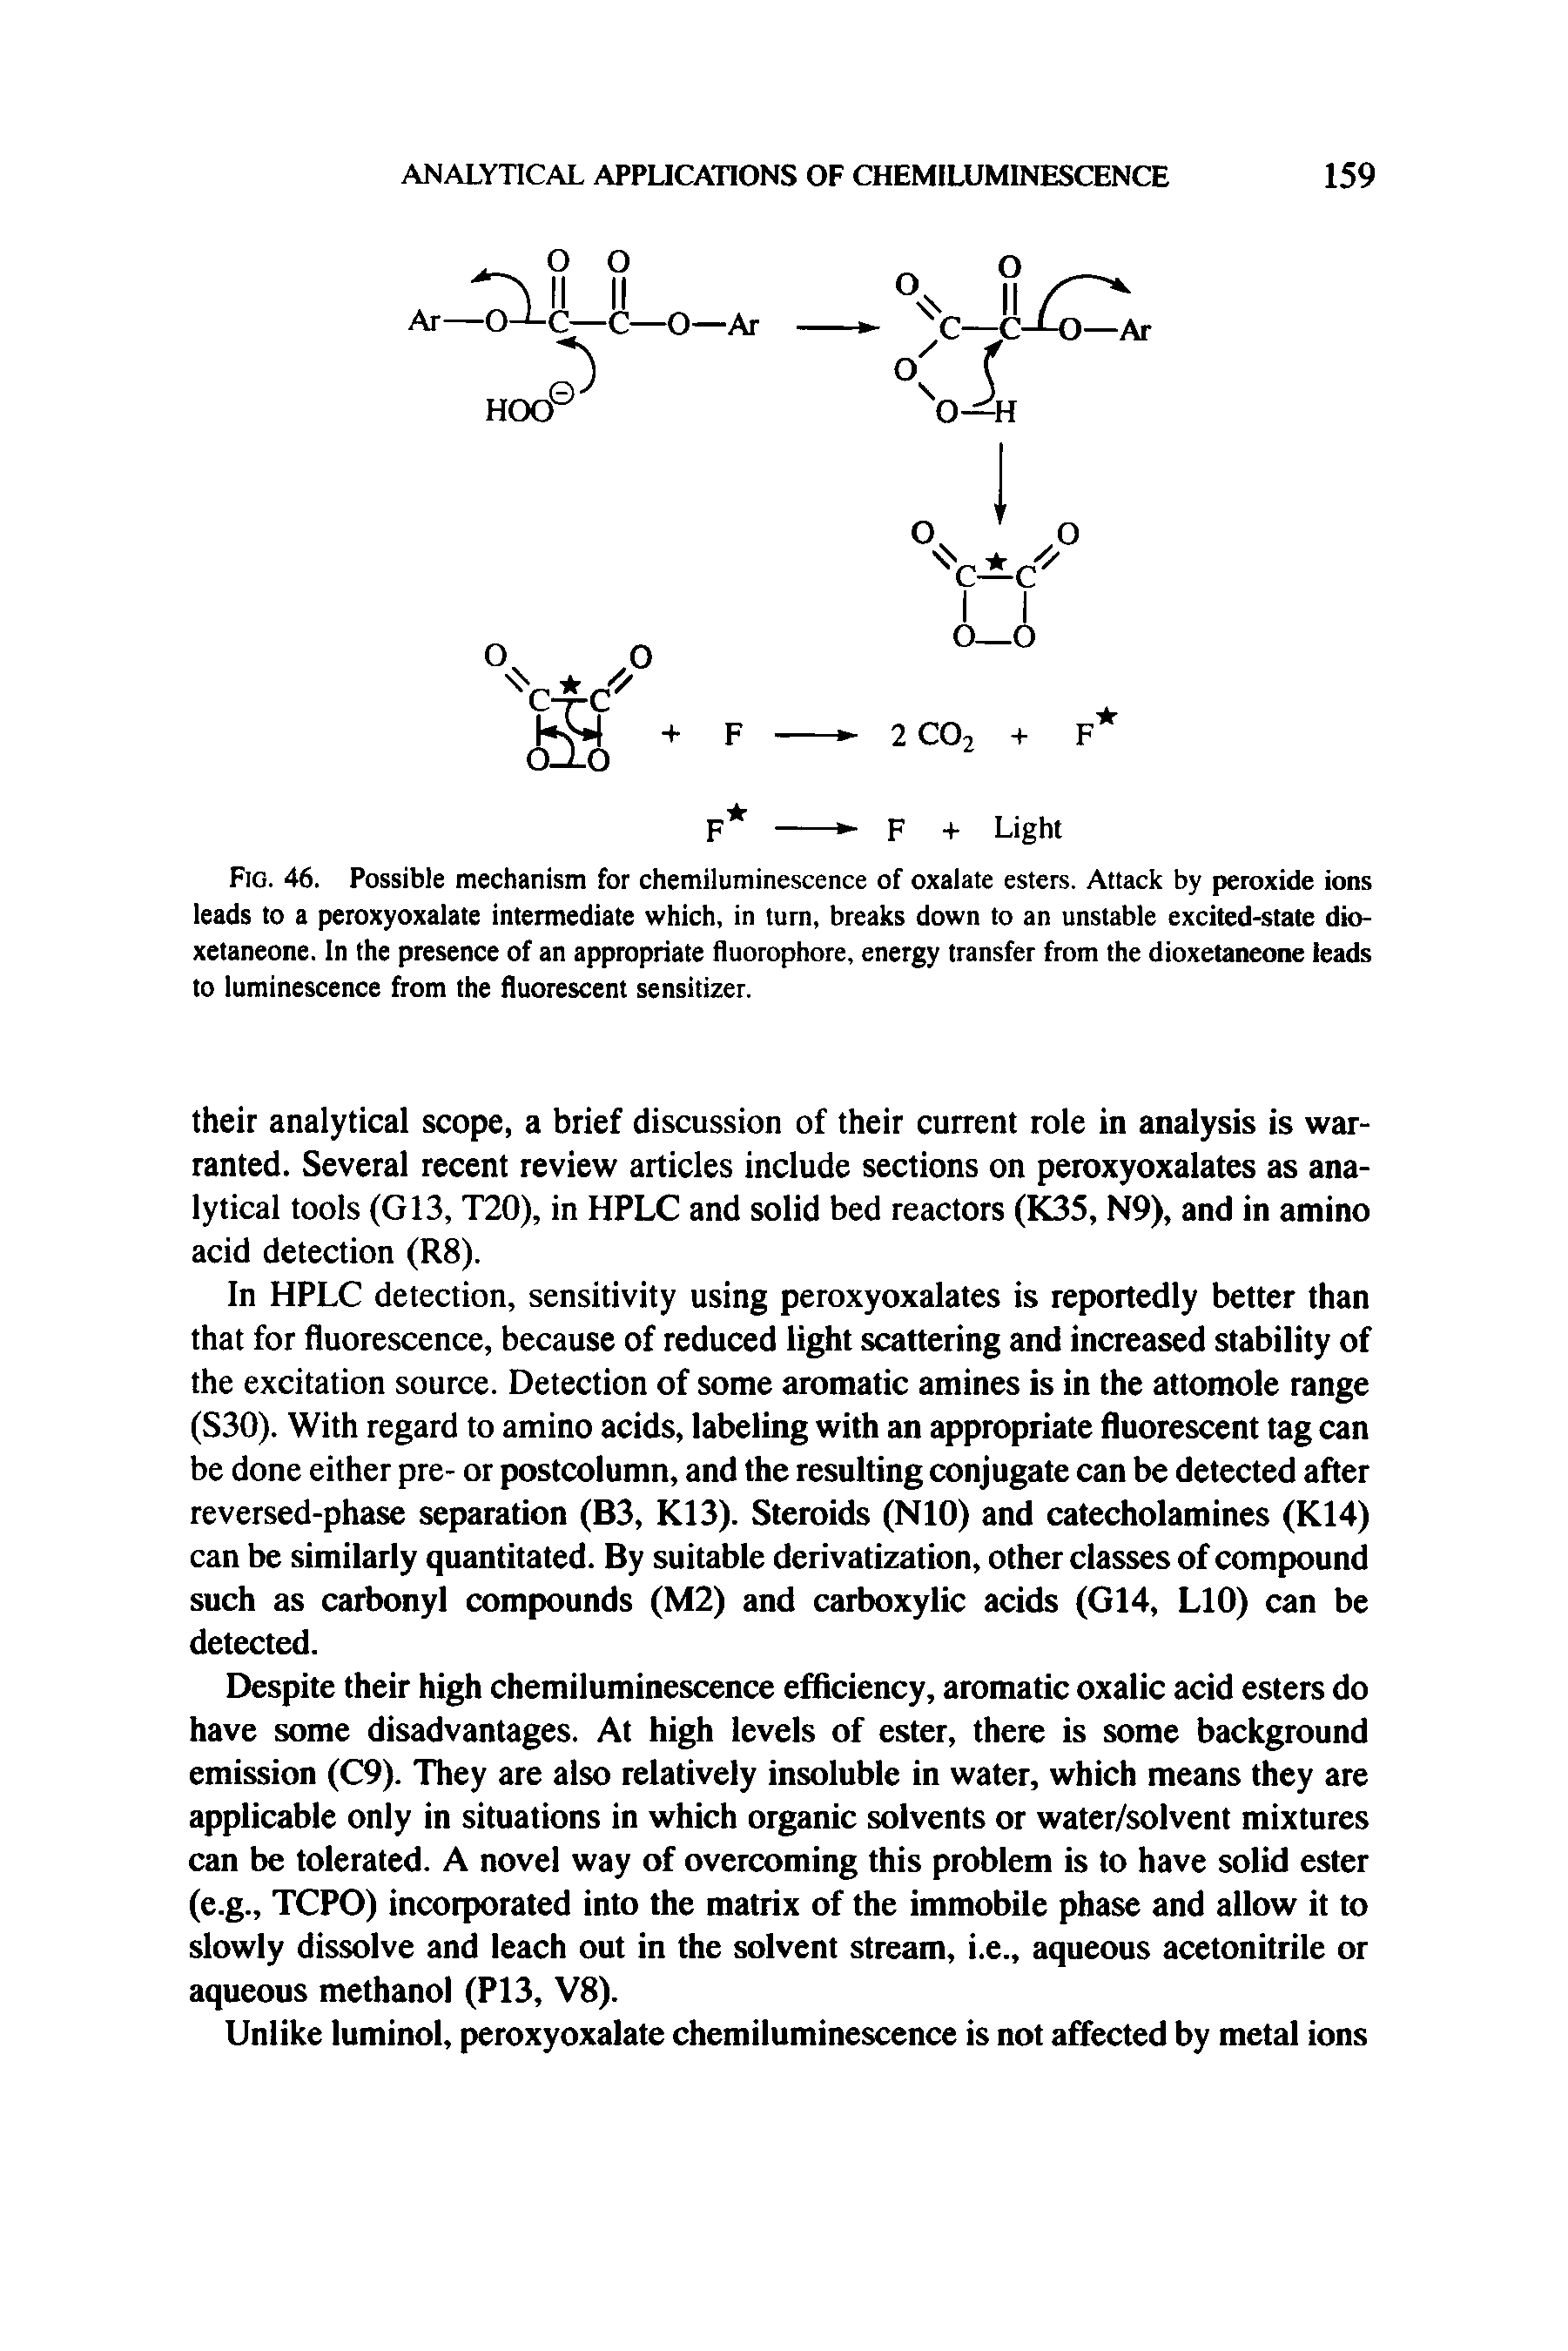 Fig. 46. Possible mechanism for chemiluminescence of oxalate esters. Attack by peroxide ions leads to a peroxyoxalate intermediate which, in turn, breaks down to an unstable excited-state dio-xetaneone. In the presence of an appropriate fluorophore, energy transfer from the dioxetaneone leads to luminescence from the fluorescent sensitizer.